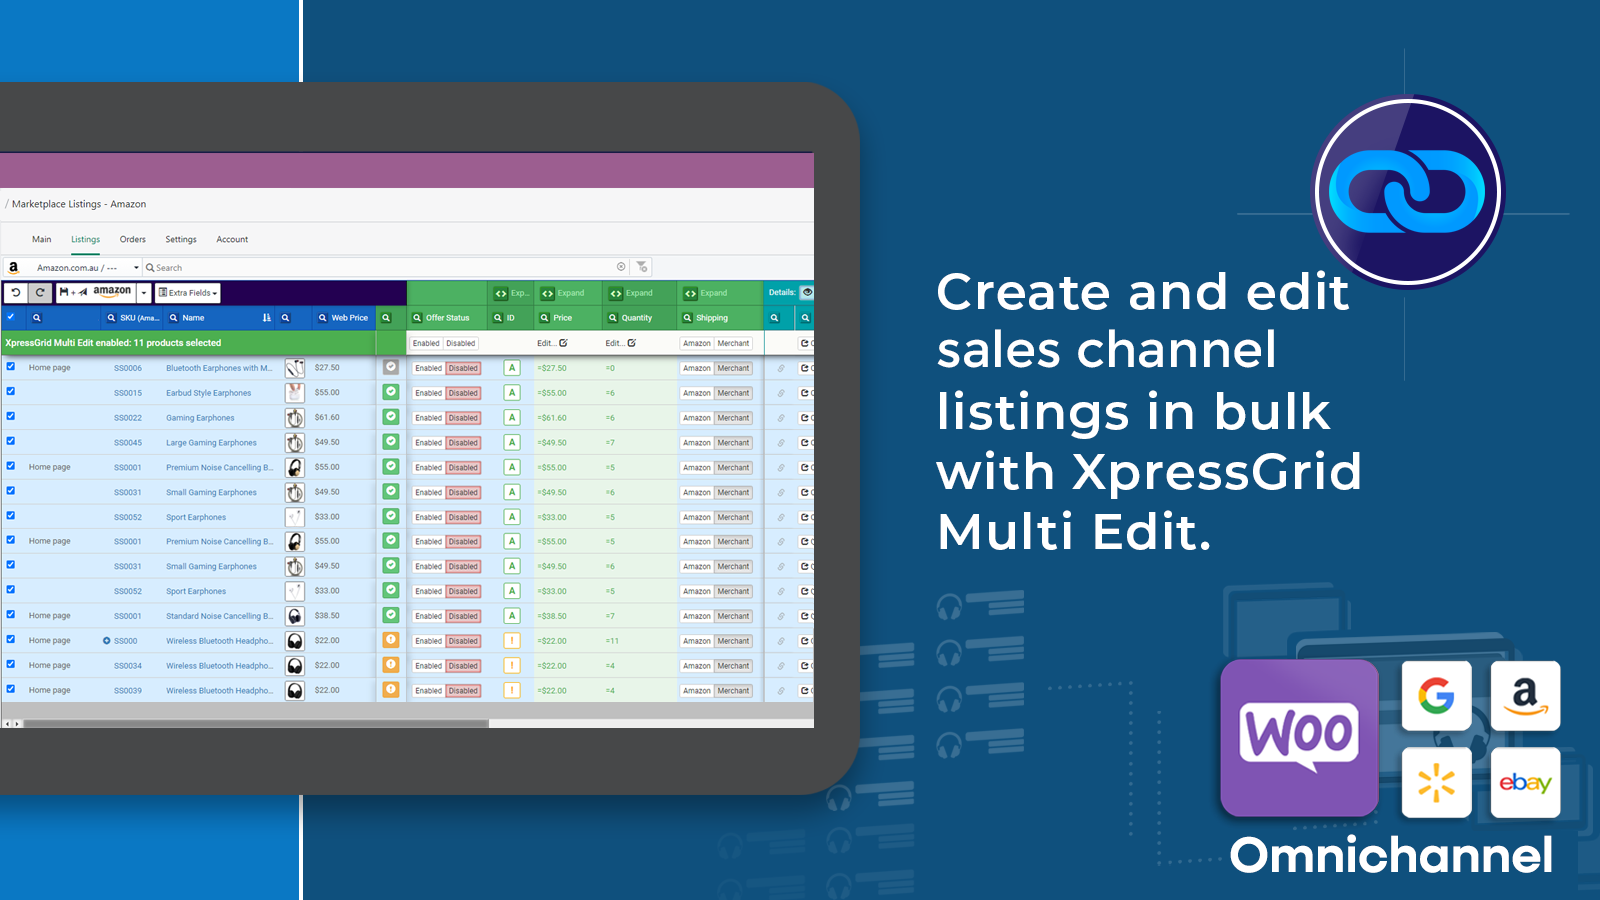 Create and edit sales channel listings in bulk with XpressGrid Multi Edit